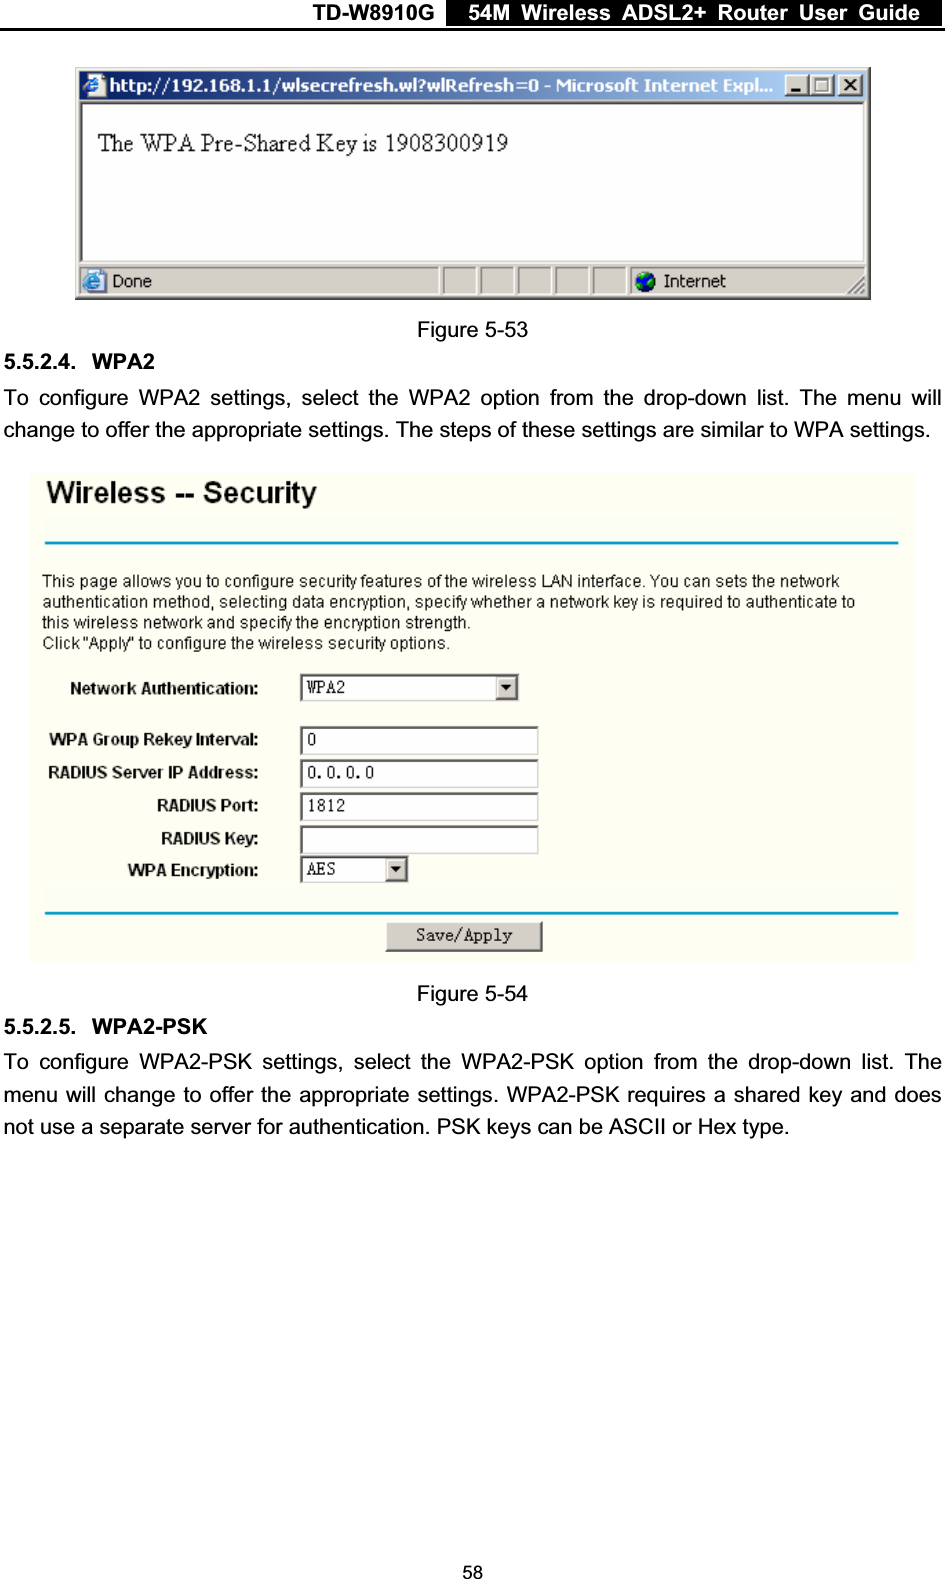 TD-W8910G    54M Wireless ADSL2+ Router User Guide  Figure 5-53 5.5.2.4. WPA2To configure WPA2 settings, select the WPA2 option from the drop-down list. The menu will change to offer the appropriate settings. The steps of these settings are similar to WPA settings. Figure 5-54 5.5.2.5. WPA2-PSKTo configure WPA2-PSK settings, select the WPA2-PSK option from the drop-down list. The menu will change to offer the appropriate settings. WPA2-PSK requires a shared key and does not use a separate server for authentication. PSK keys can be ASCII or Hex type.  58